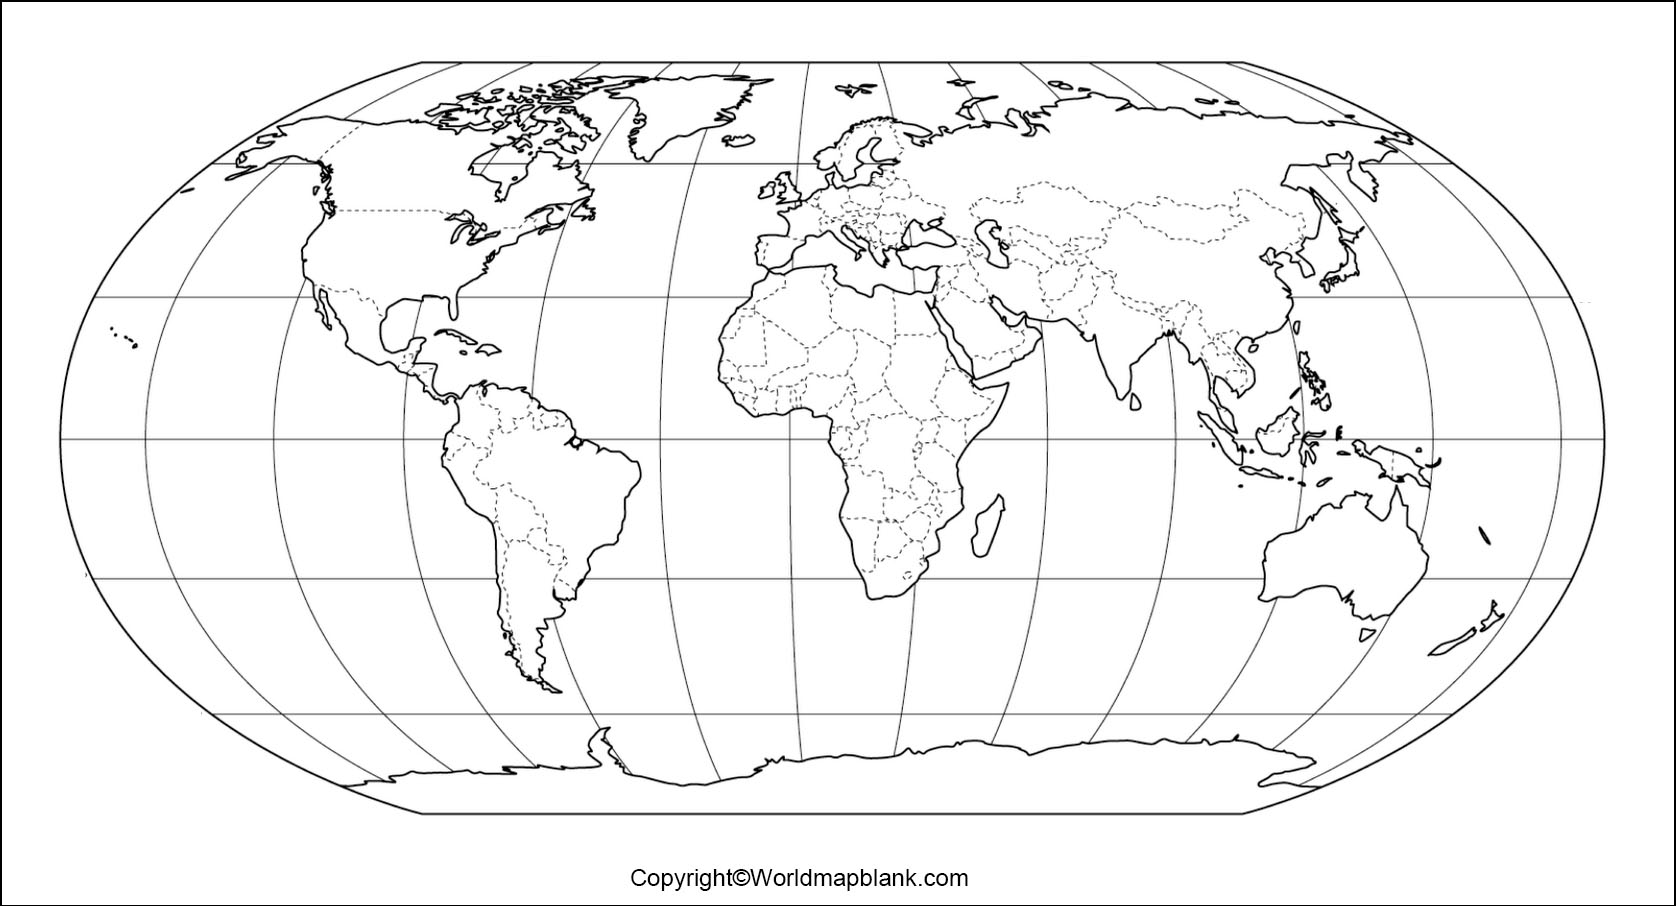 Blank World Map with Borders